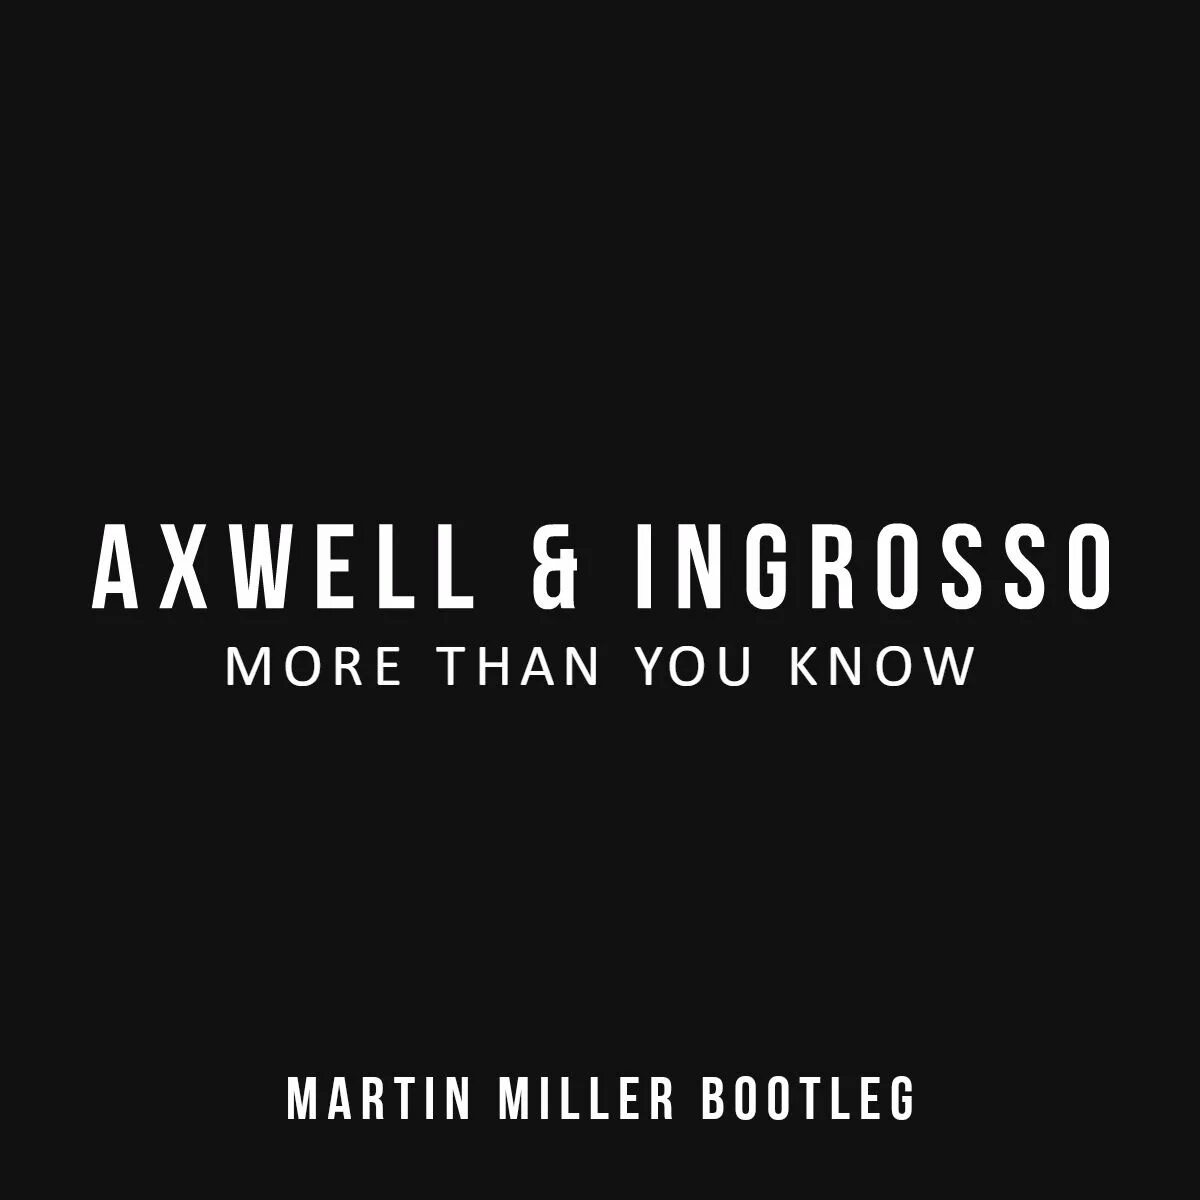 Axwell more than you. Аксвелл Ингроссо more than you know. Axwell ingrosso more than you. More than you know Axwell ingrosso.